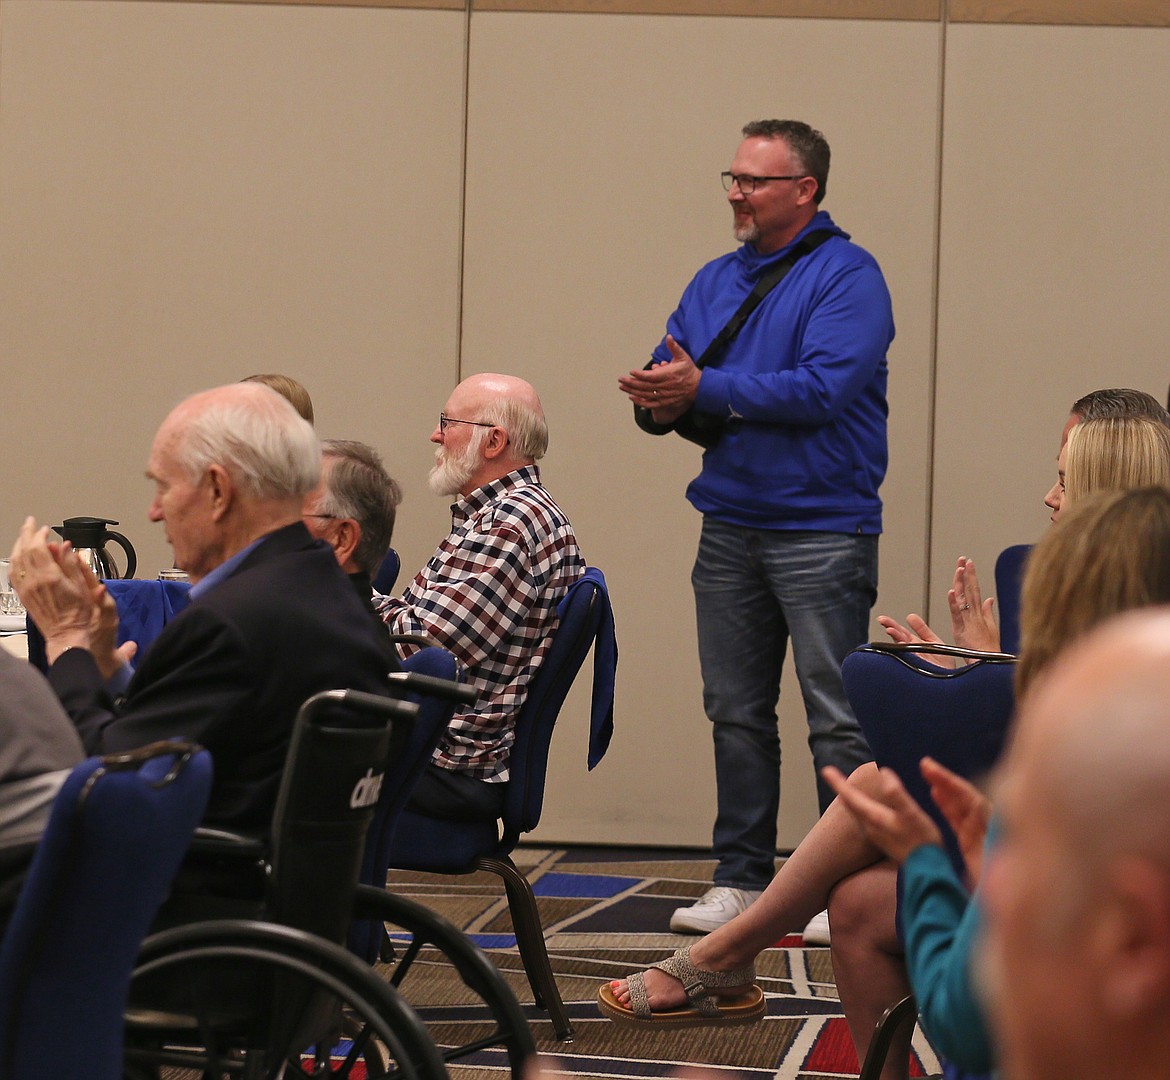 Greg Washington, a board member with the Coeur d'Alene High School Viking Booster Club and Educational Foundation applauds as his grant is announced during the Coeur d'Alene Rotary Club meeting Friday. Rotary distributed $46,000 to nearly 20 area nonprofits and causes.